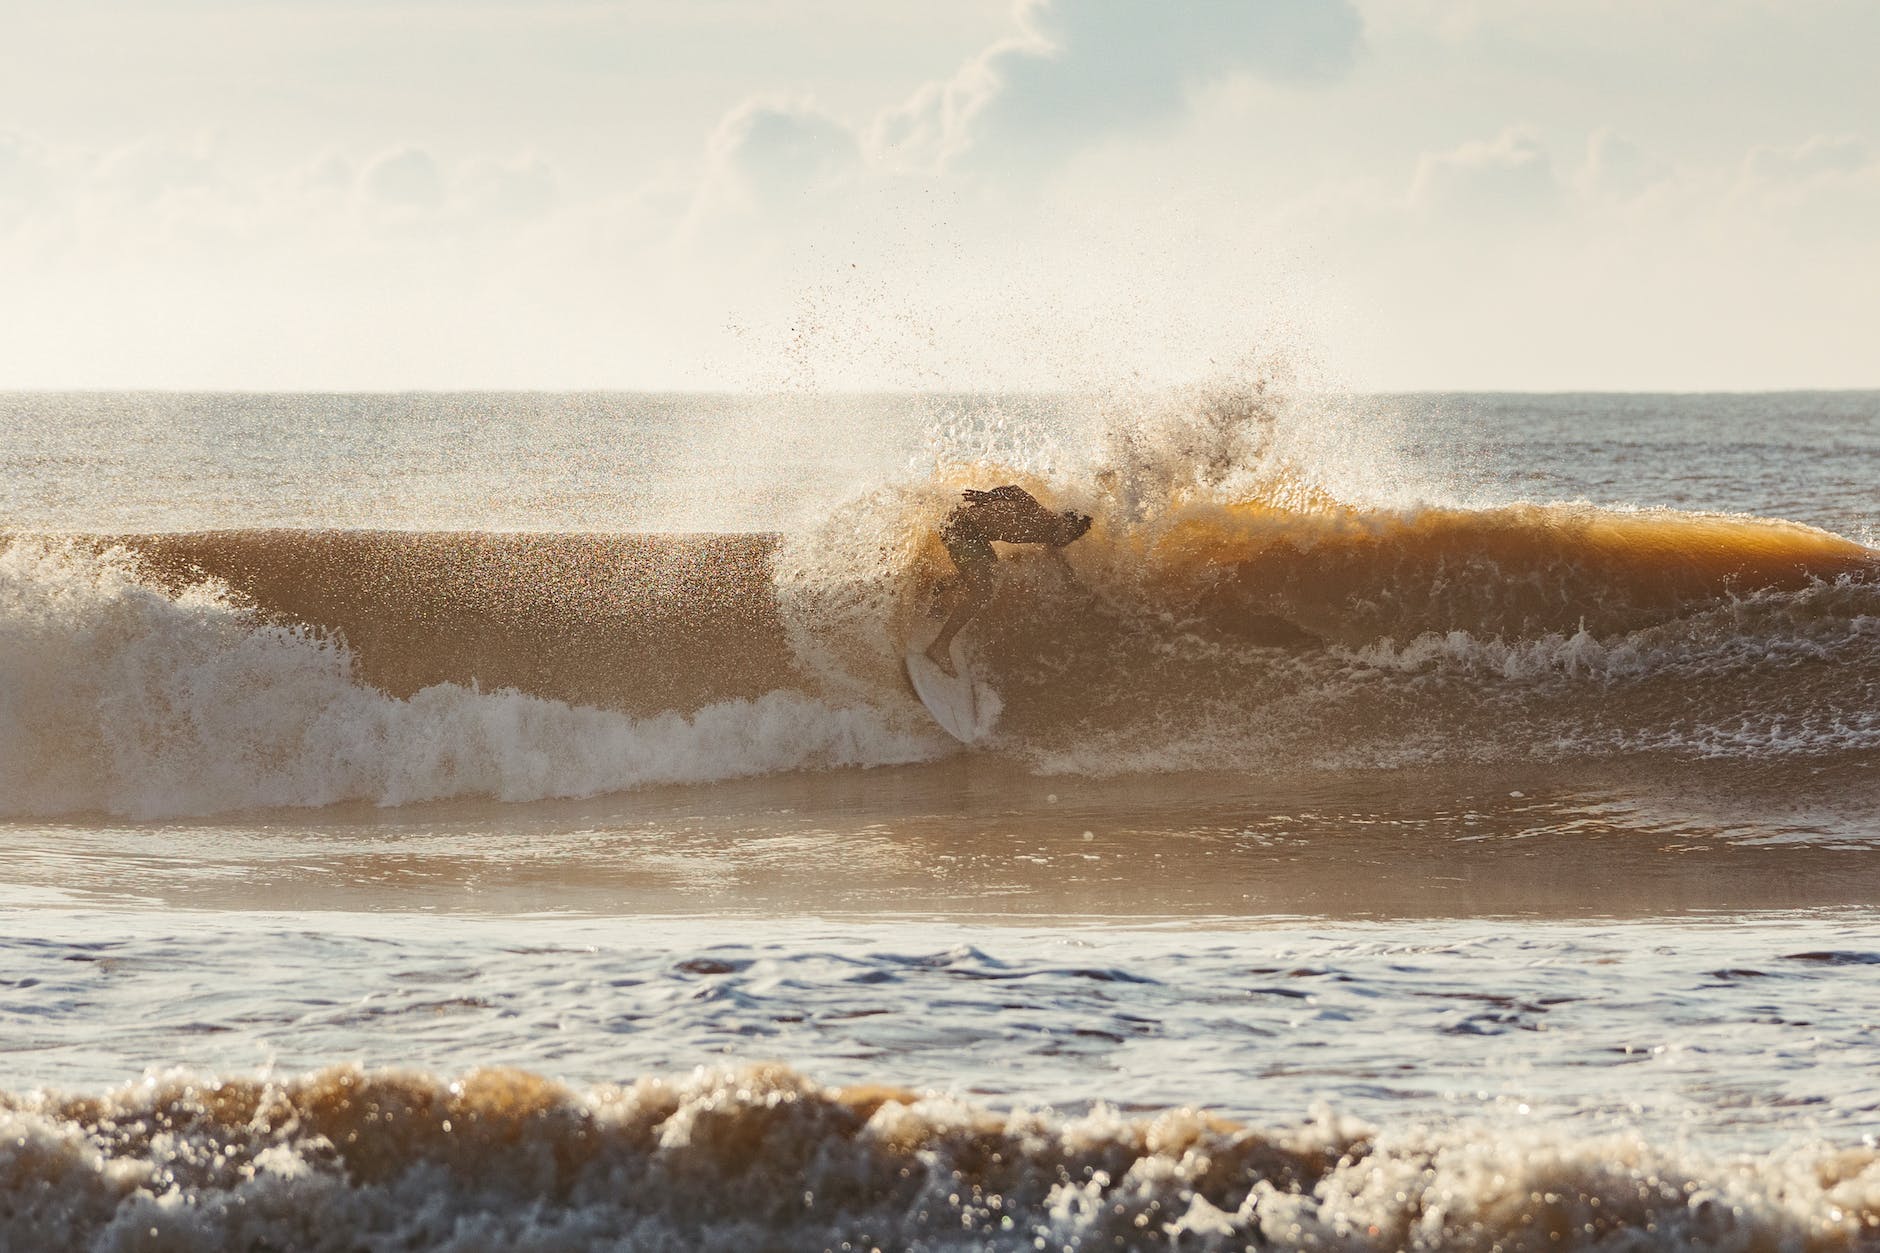 man surfing atop wave by sea shore